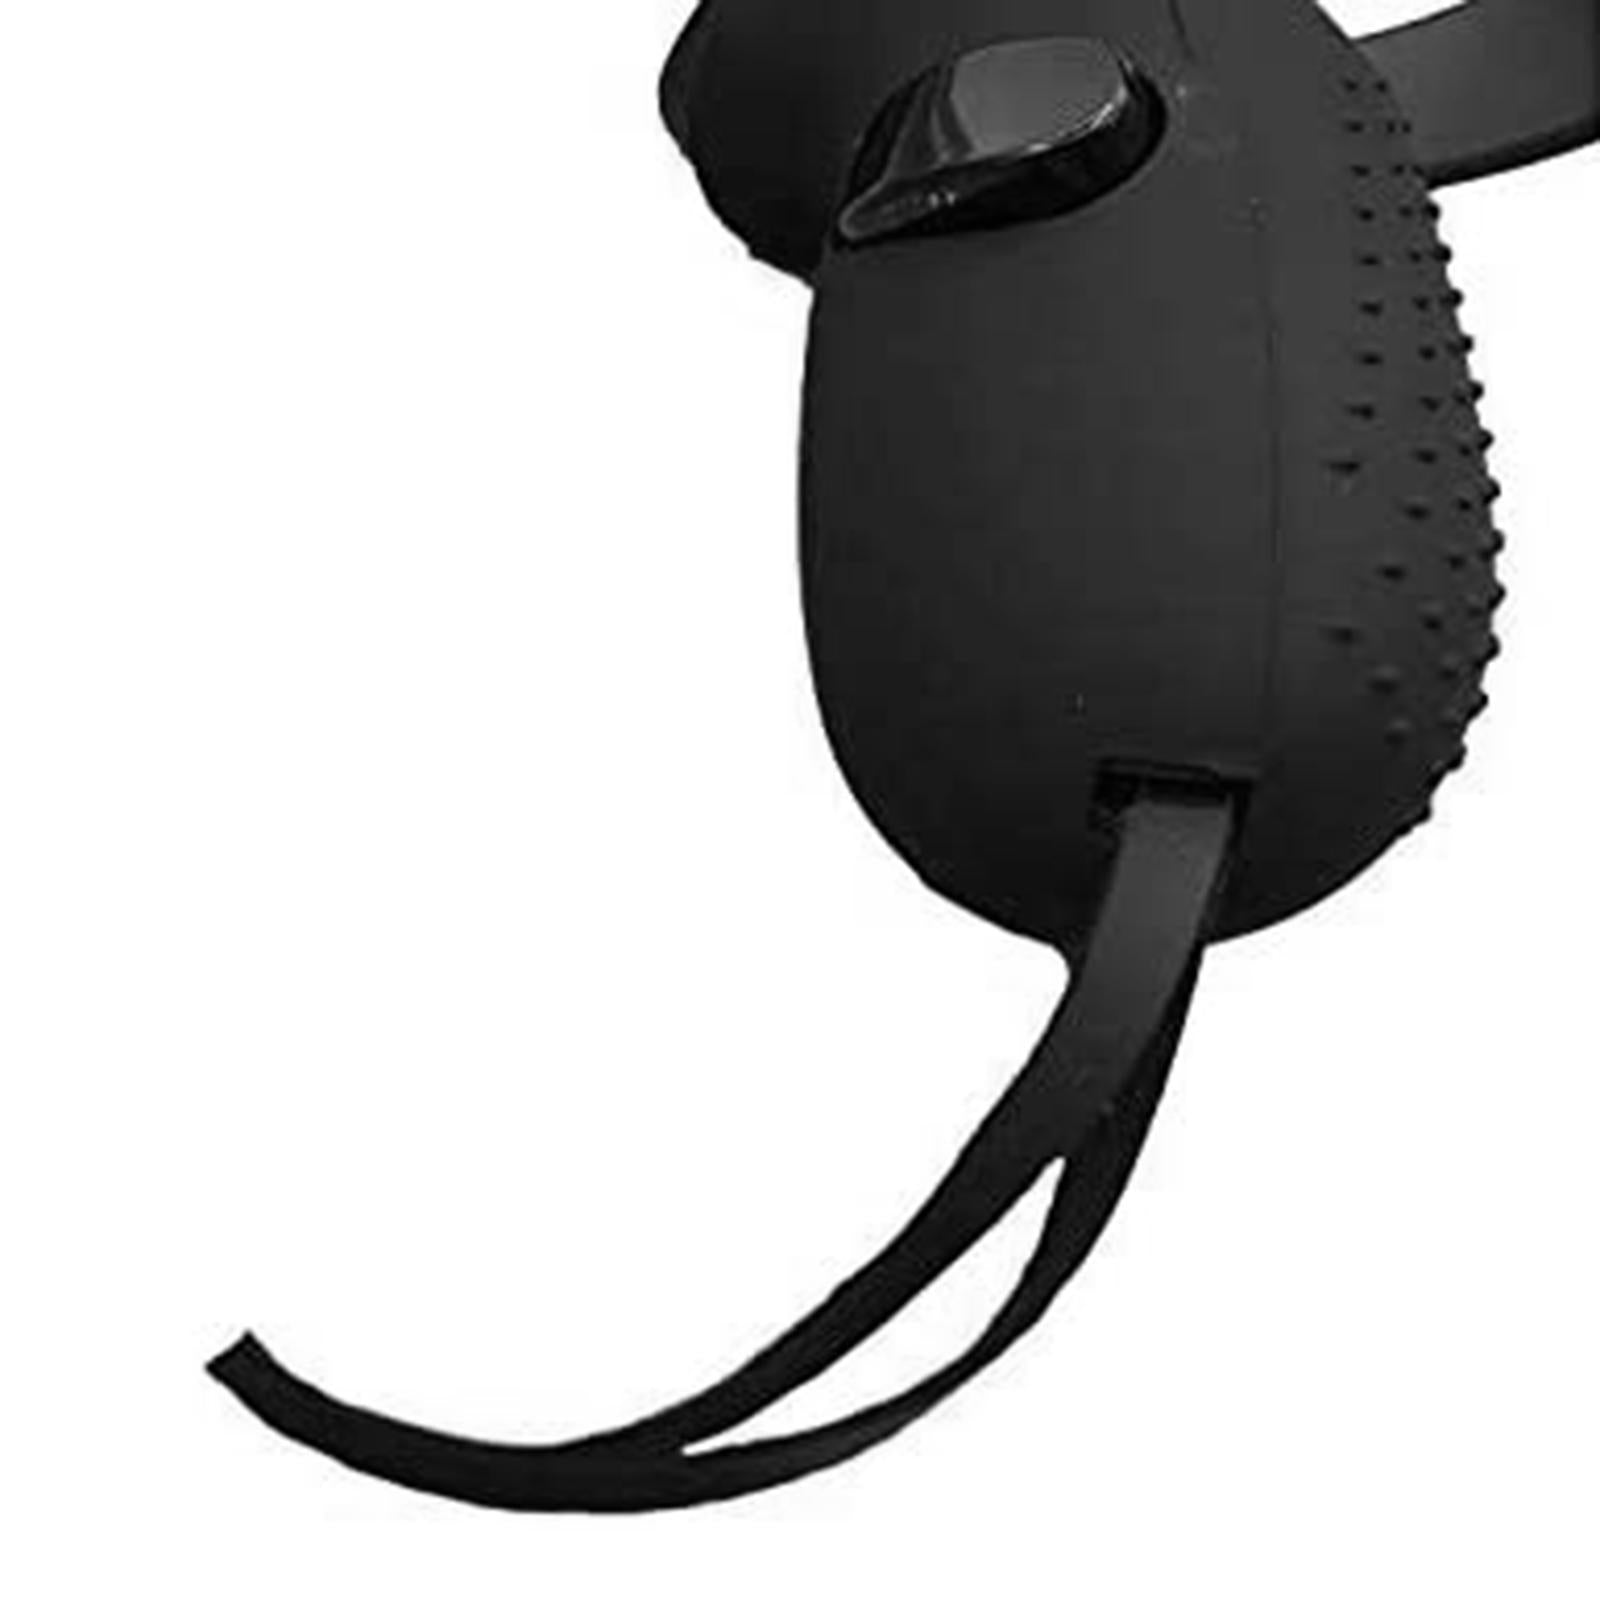 Silicone Protective Skins Grip Cover for Oculus Quest 1 Rift-S Elastic Black